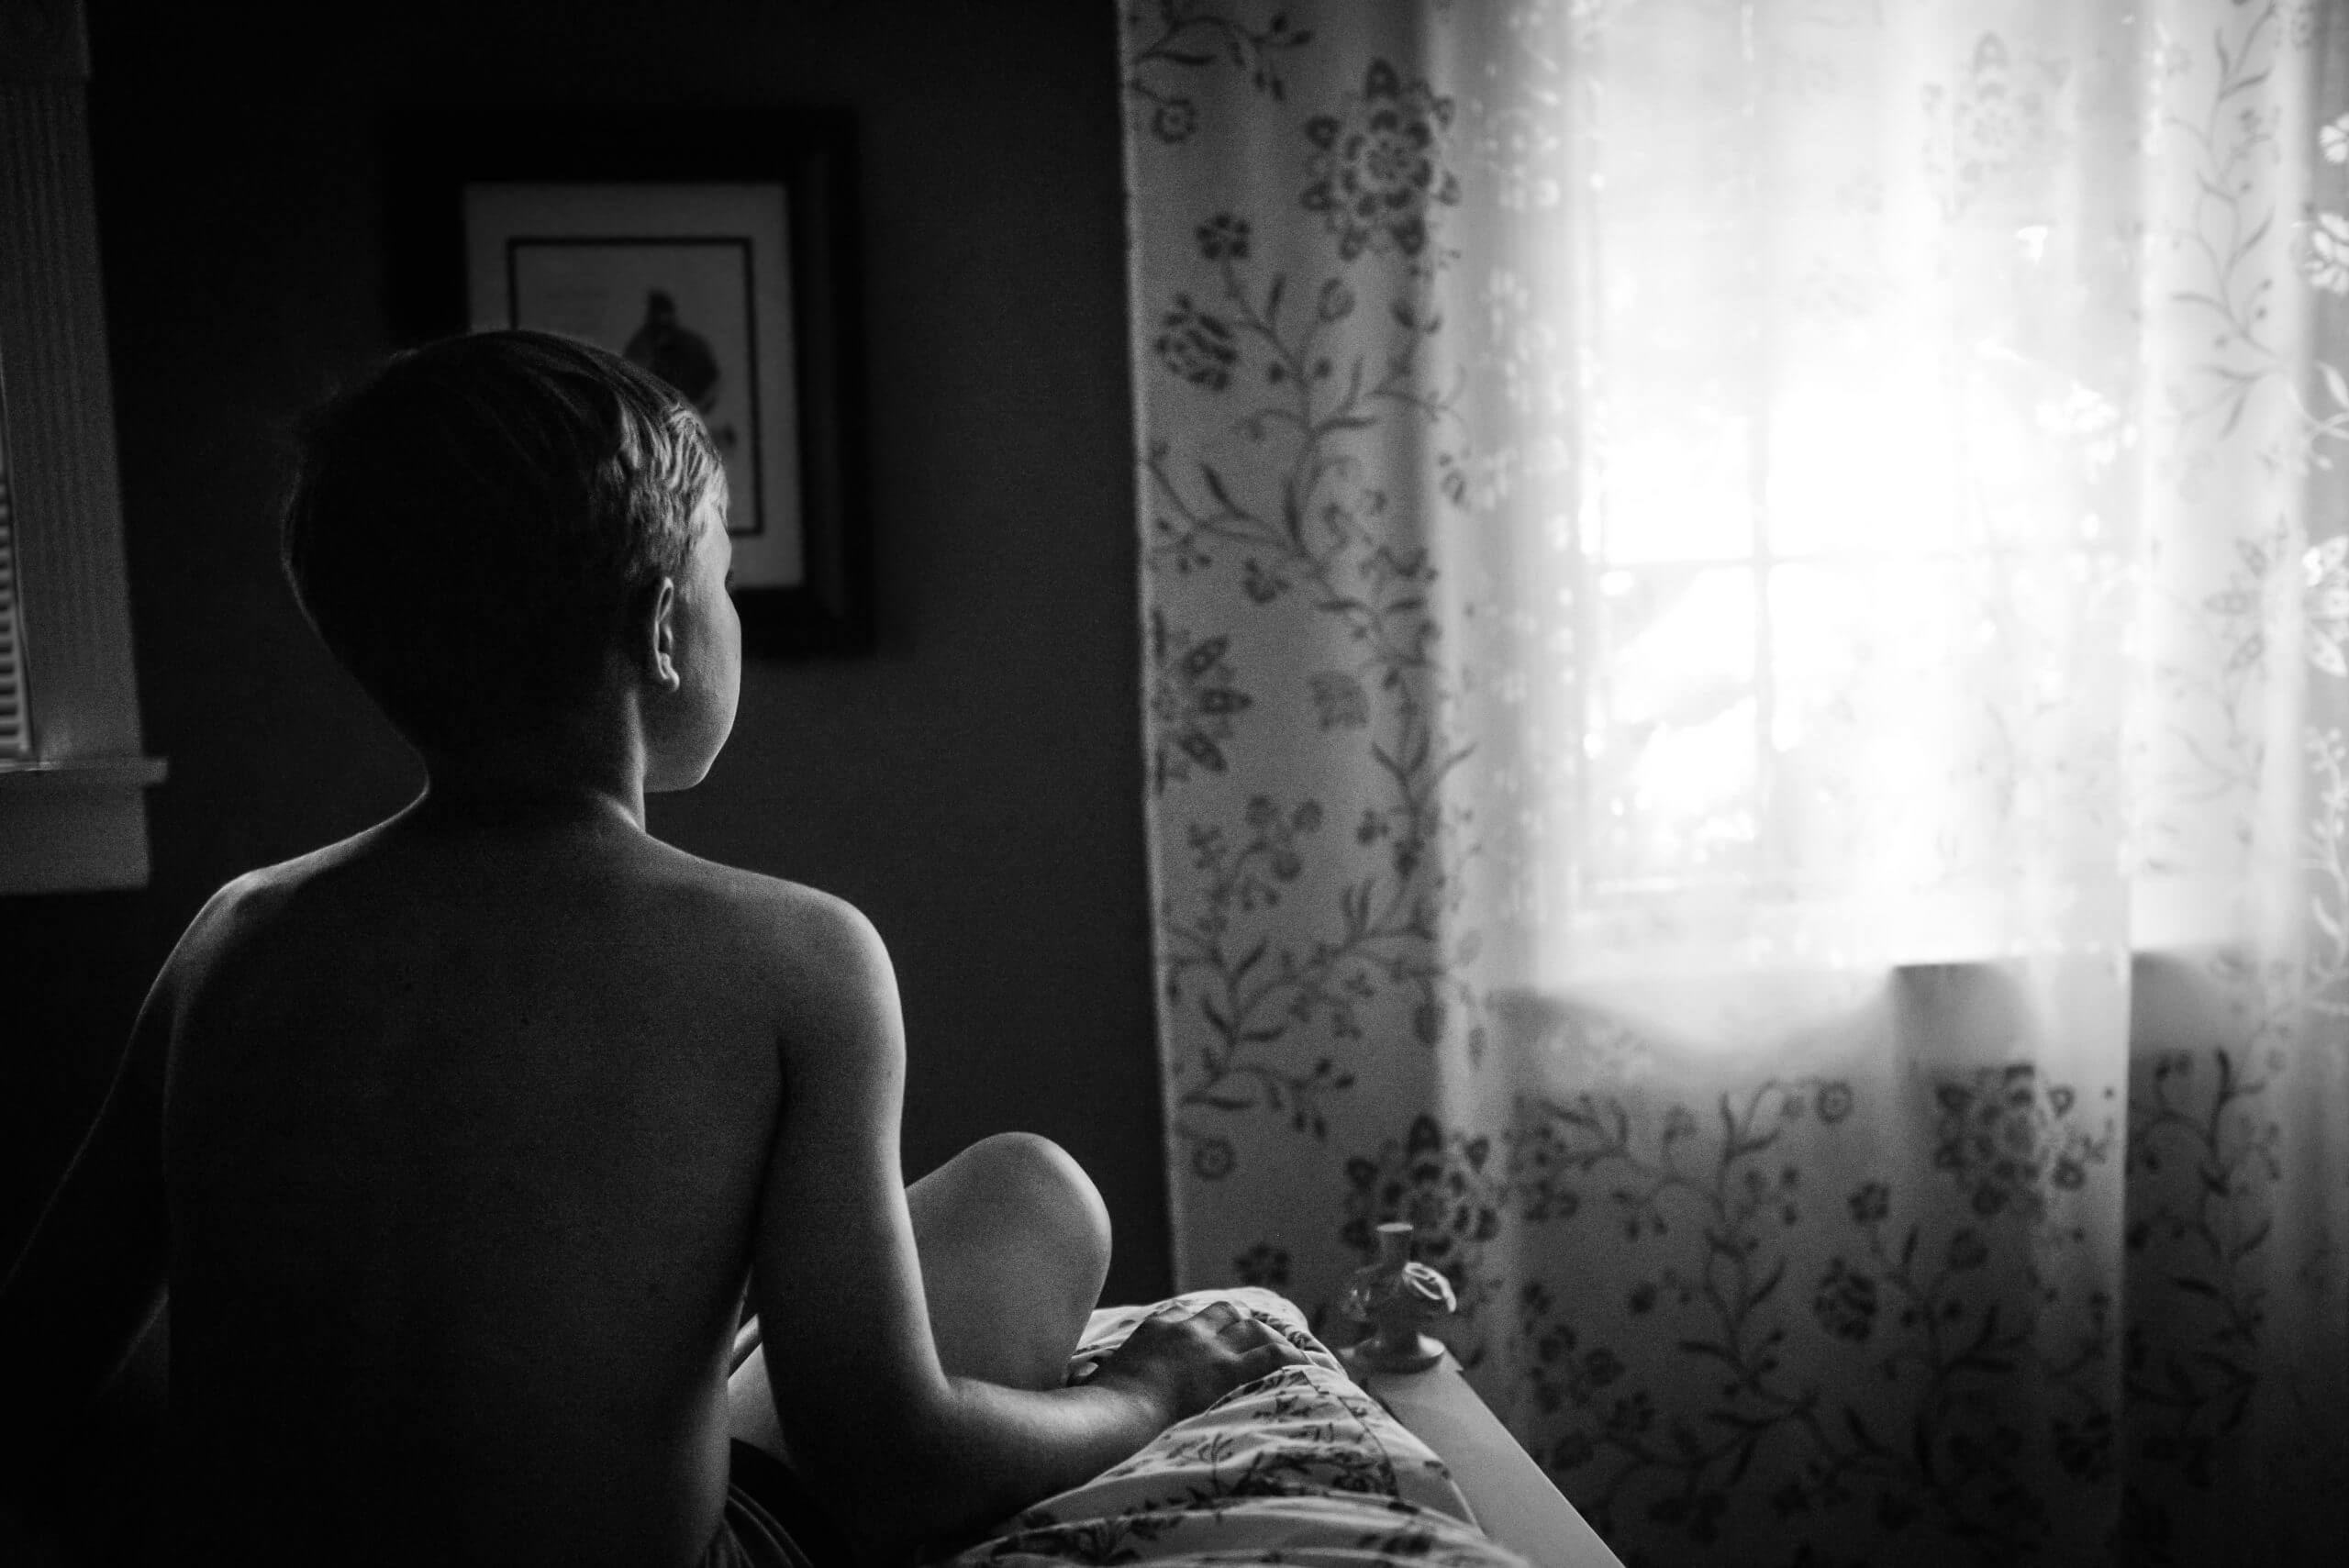 A boy sits on the foot of a bed and looks toward the curtained window in front of him. Light comes in through the window.